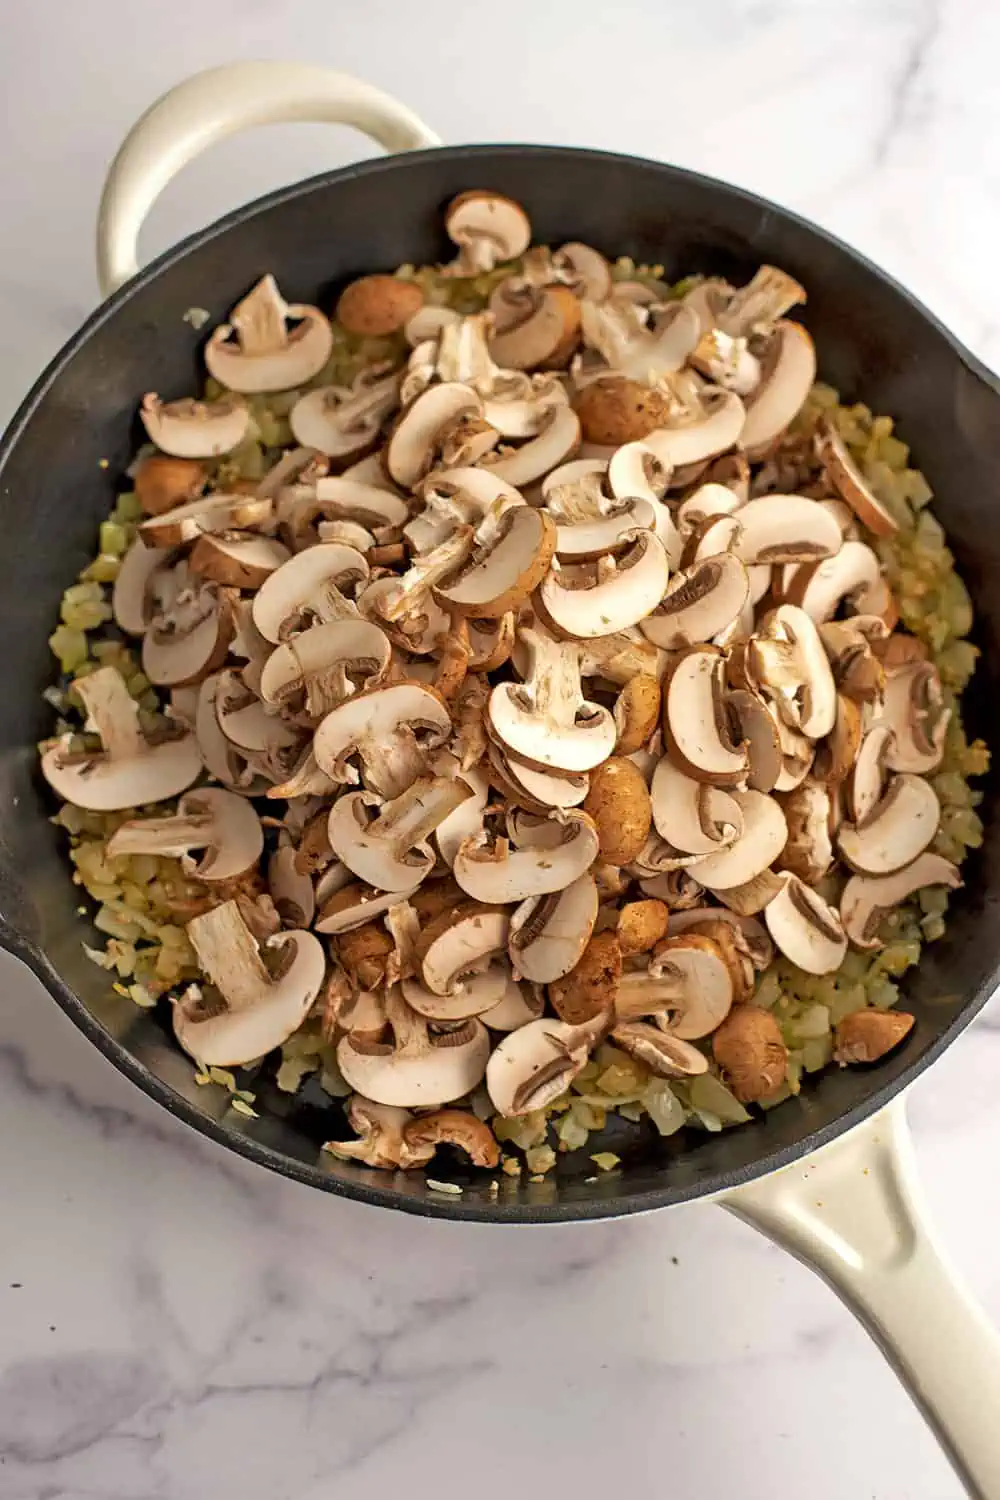 Sliced mushrooms added to skillet before cooking.